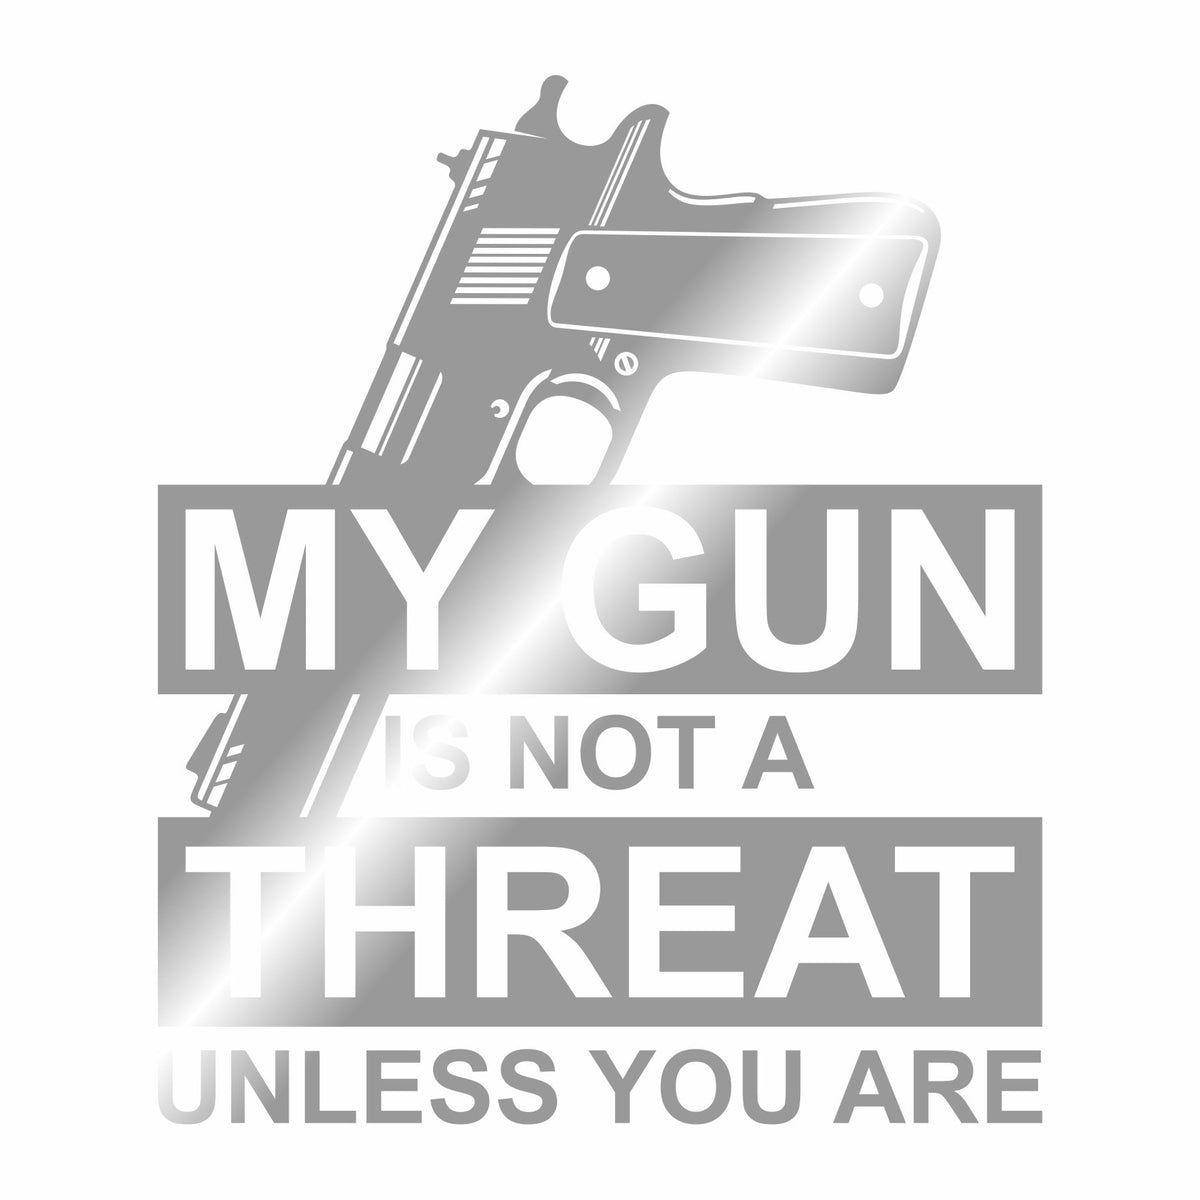 My Gun Is Not a Threat - Unless You Are - 9mm - Vinyl Decal - Free Shipping